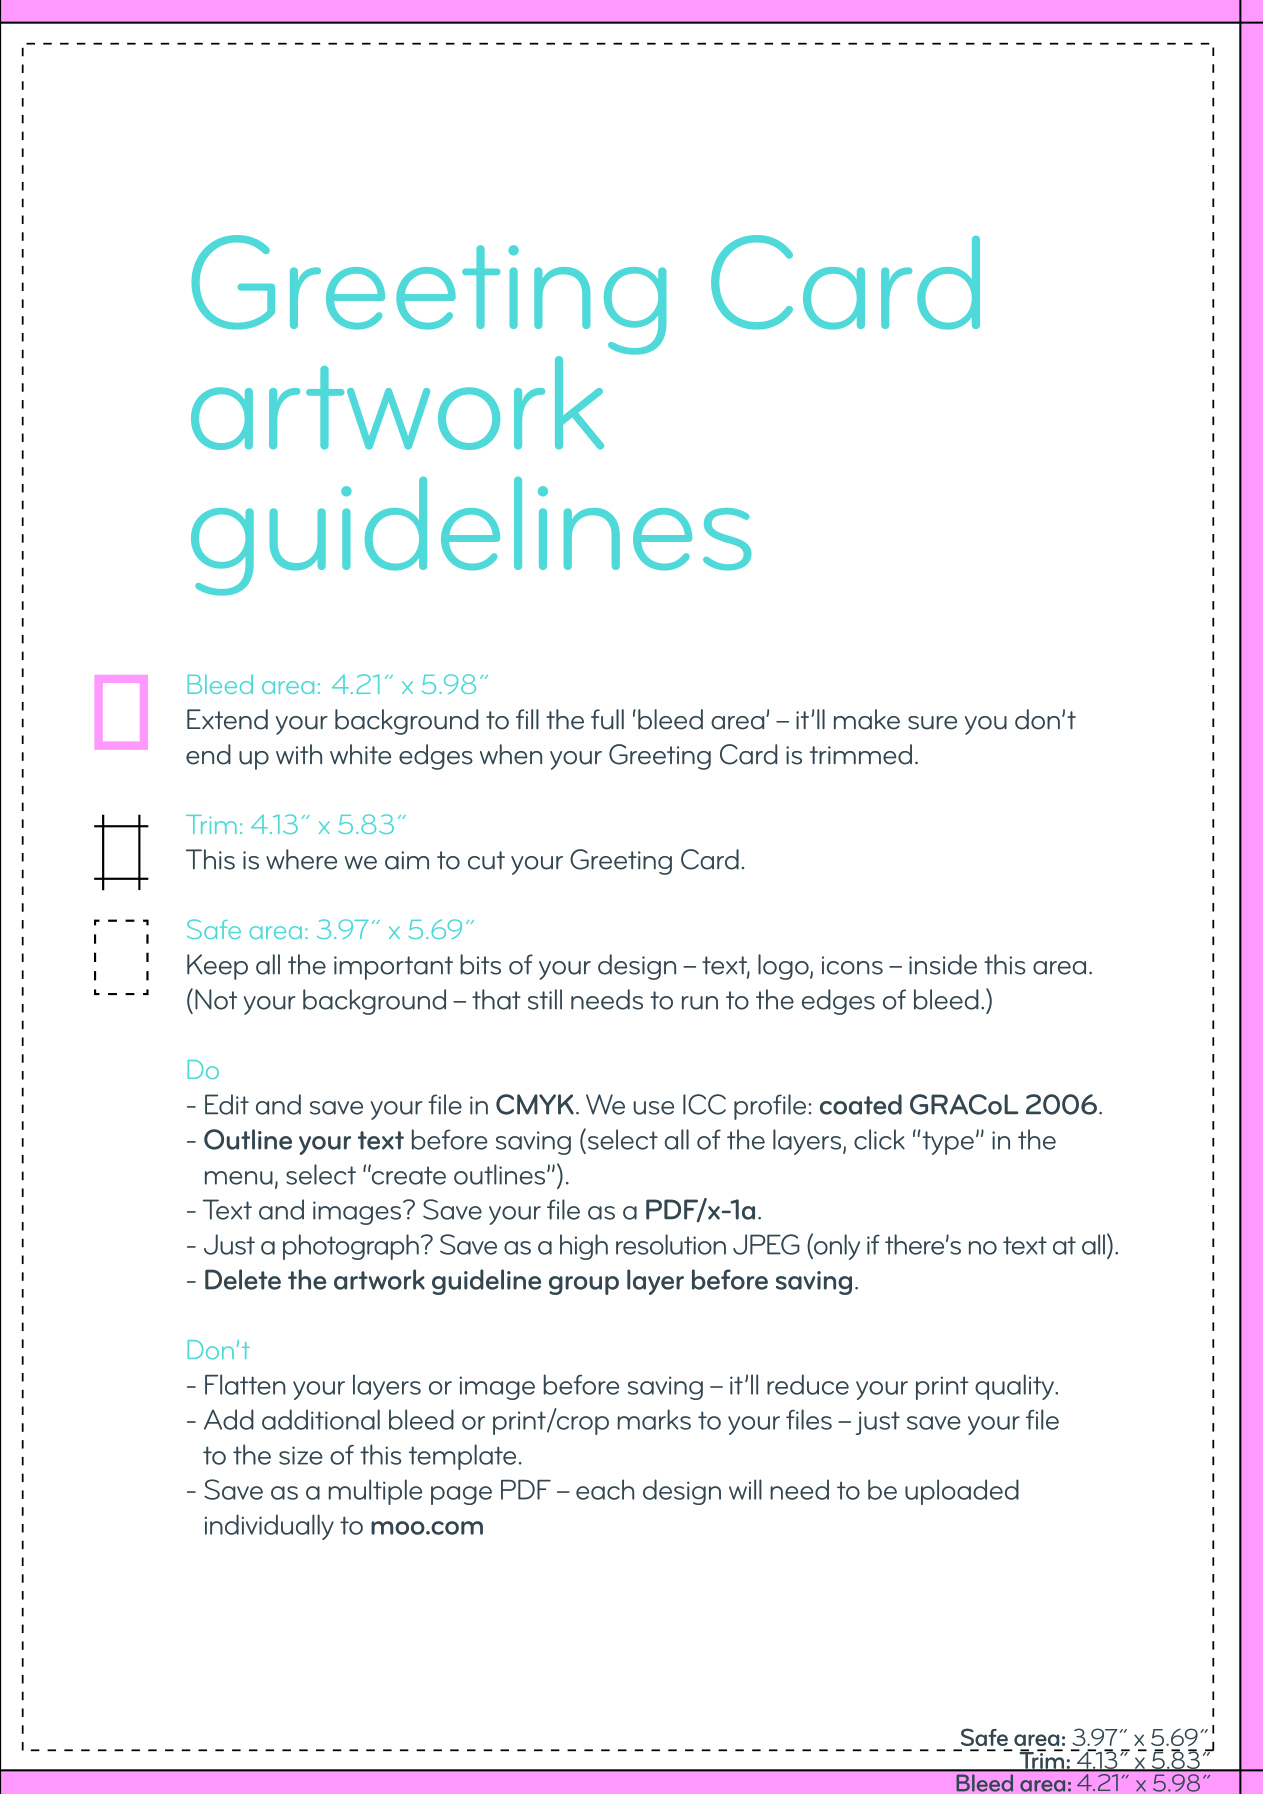 Greeting Card Design Guidelines & Artwork Templates | Moo Intended For Indesign Birthday Card Template